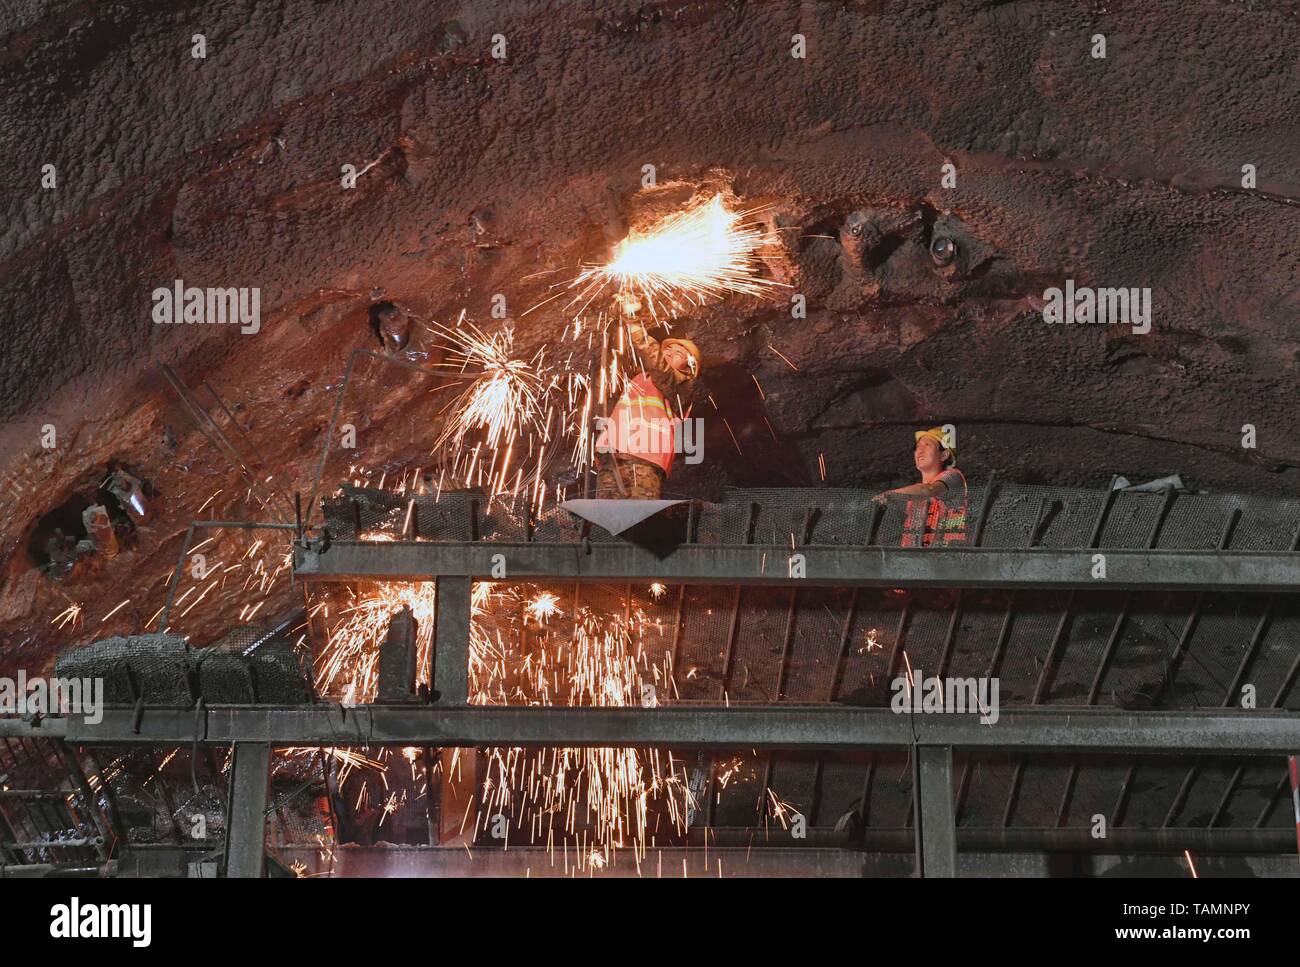 puer-25th-may-2019-constructors-work-at-the-construction-site-of-dajianshan-railway-tunnel-of-the-yuxi-mohan-railway-in-southwest-chinas-yunnan-province-may-25-2019-credit-yang-zongyouxinhuaalamy-live-news-TAMNPY.jpg